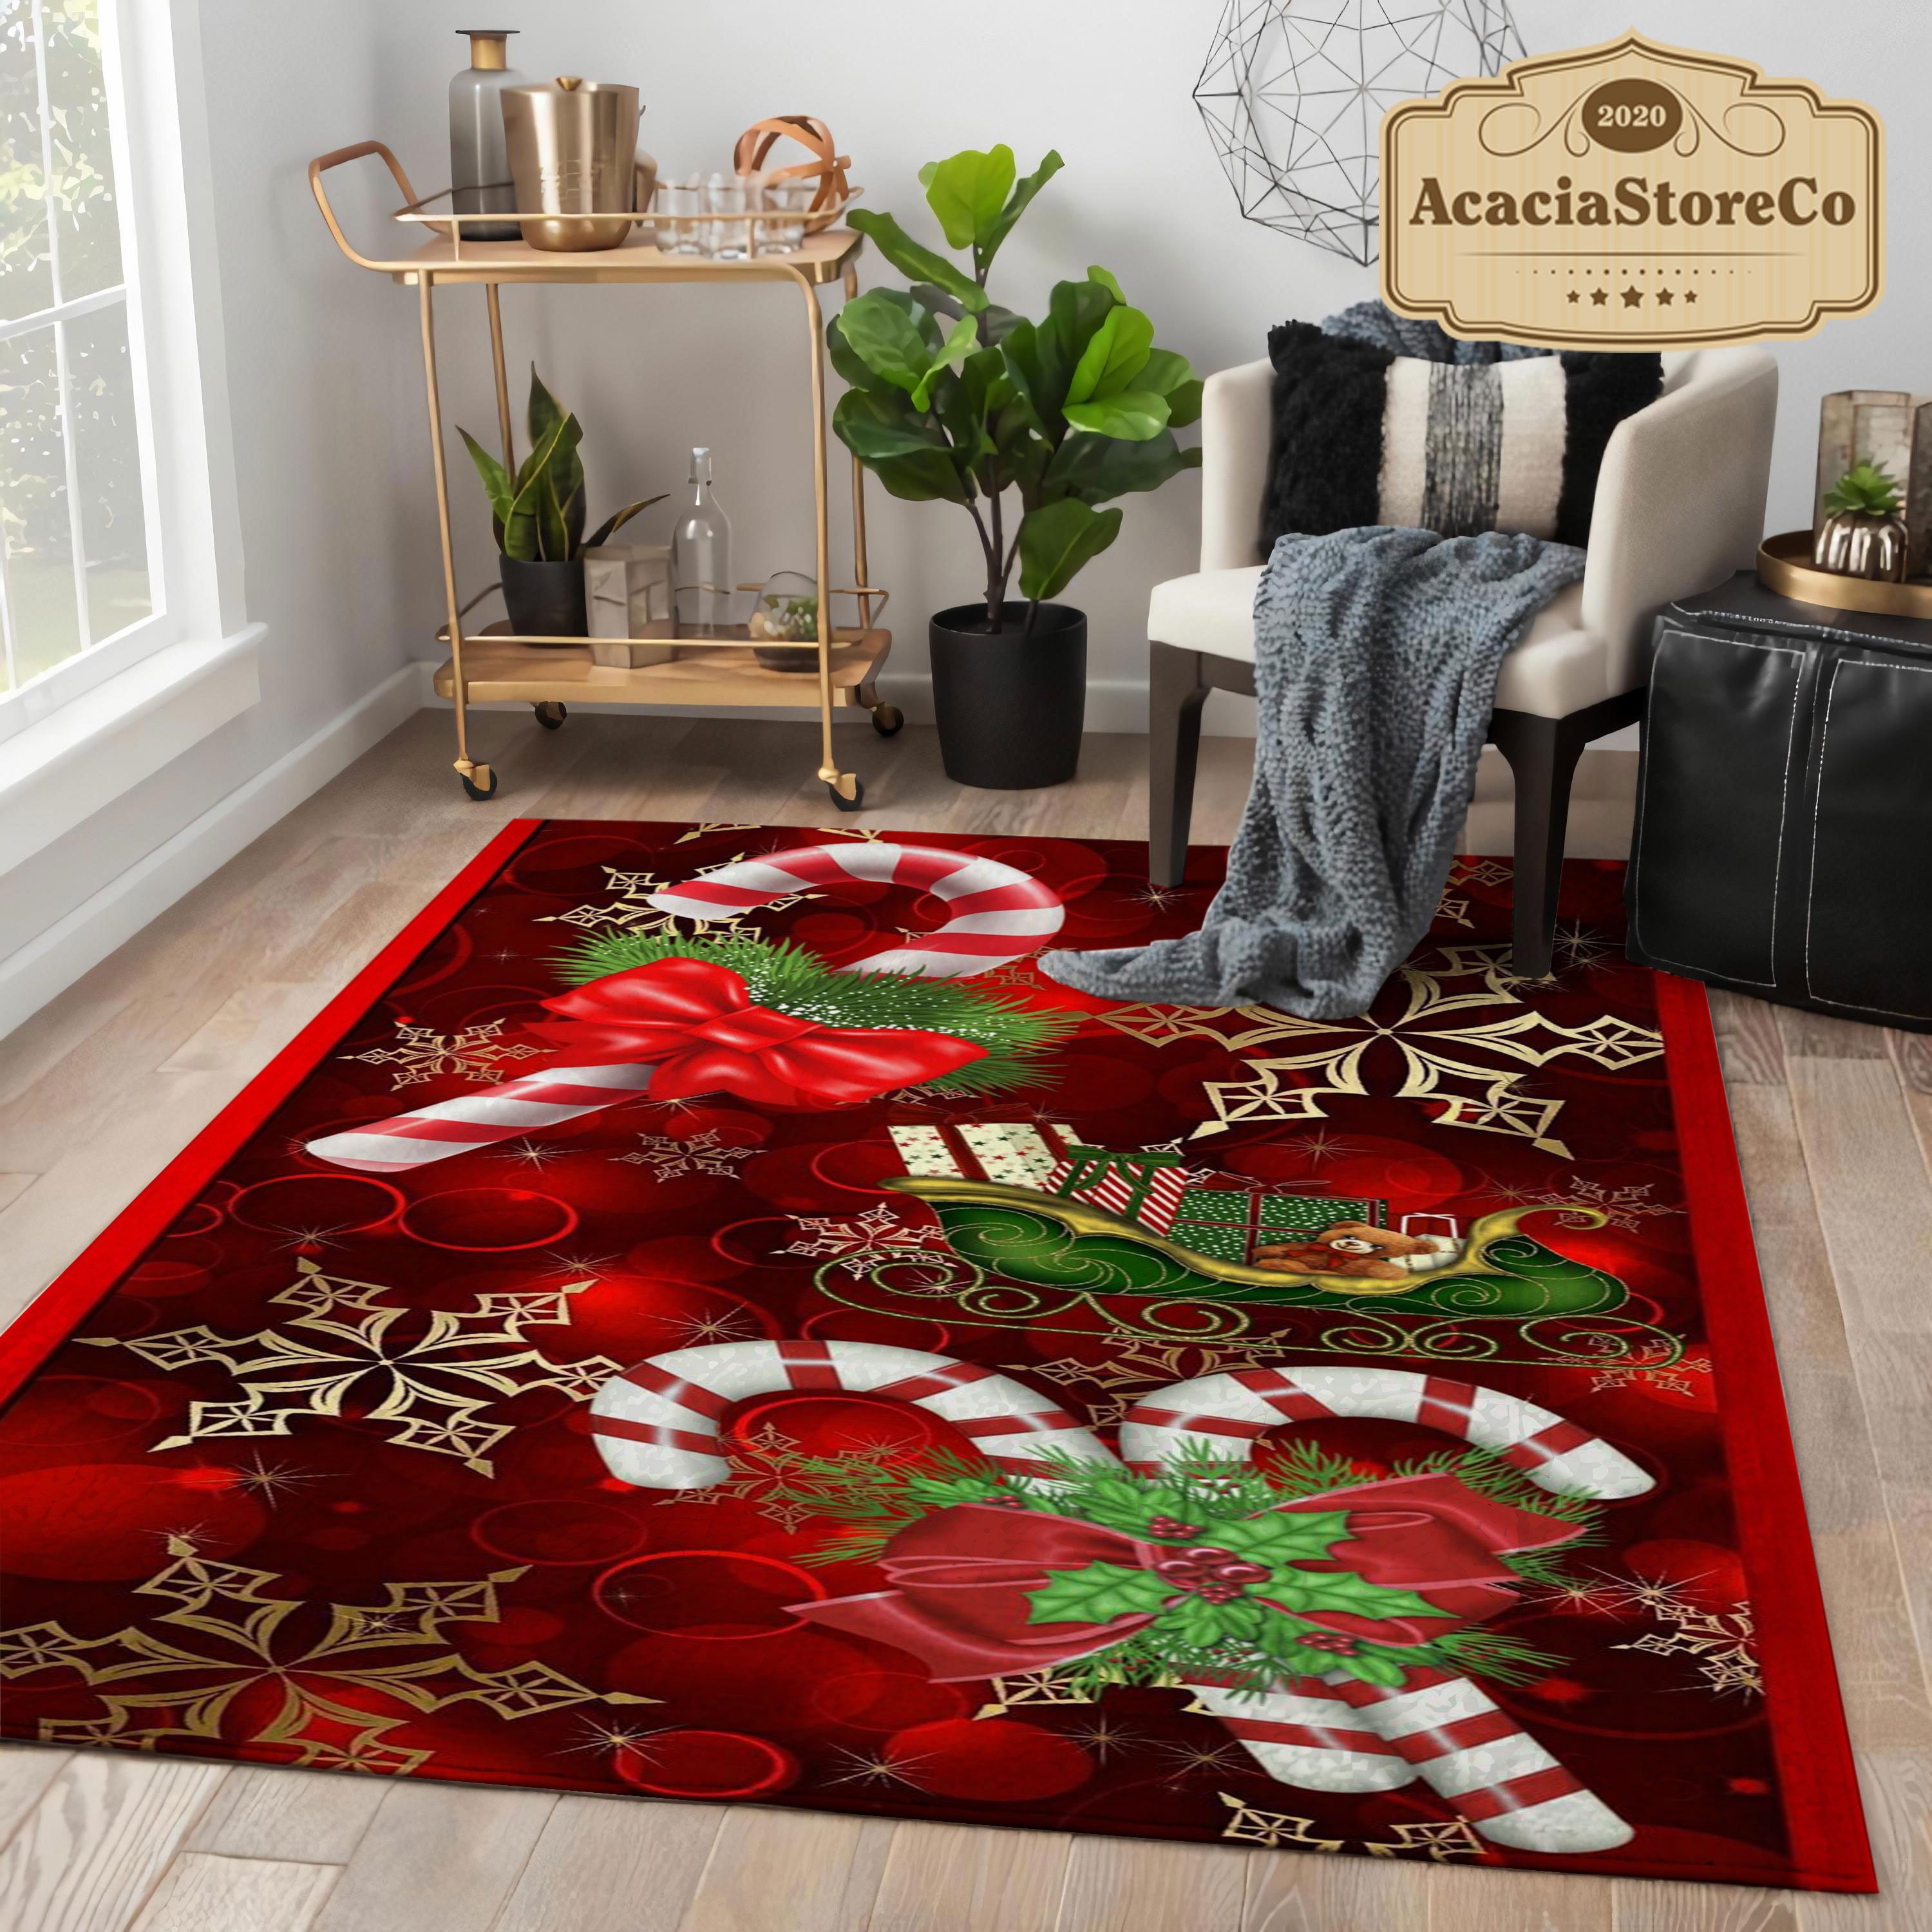 Best Selling Product] Supreme Lv Red Area Rug Living Room Rug Christmas  Gift US Decor